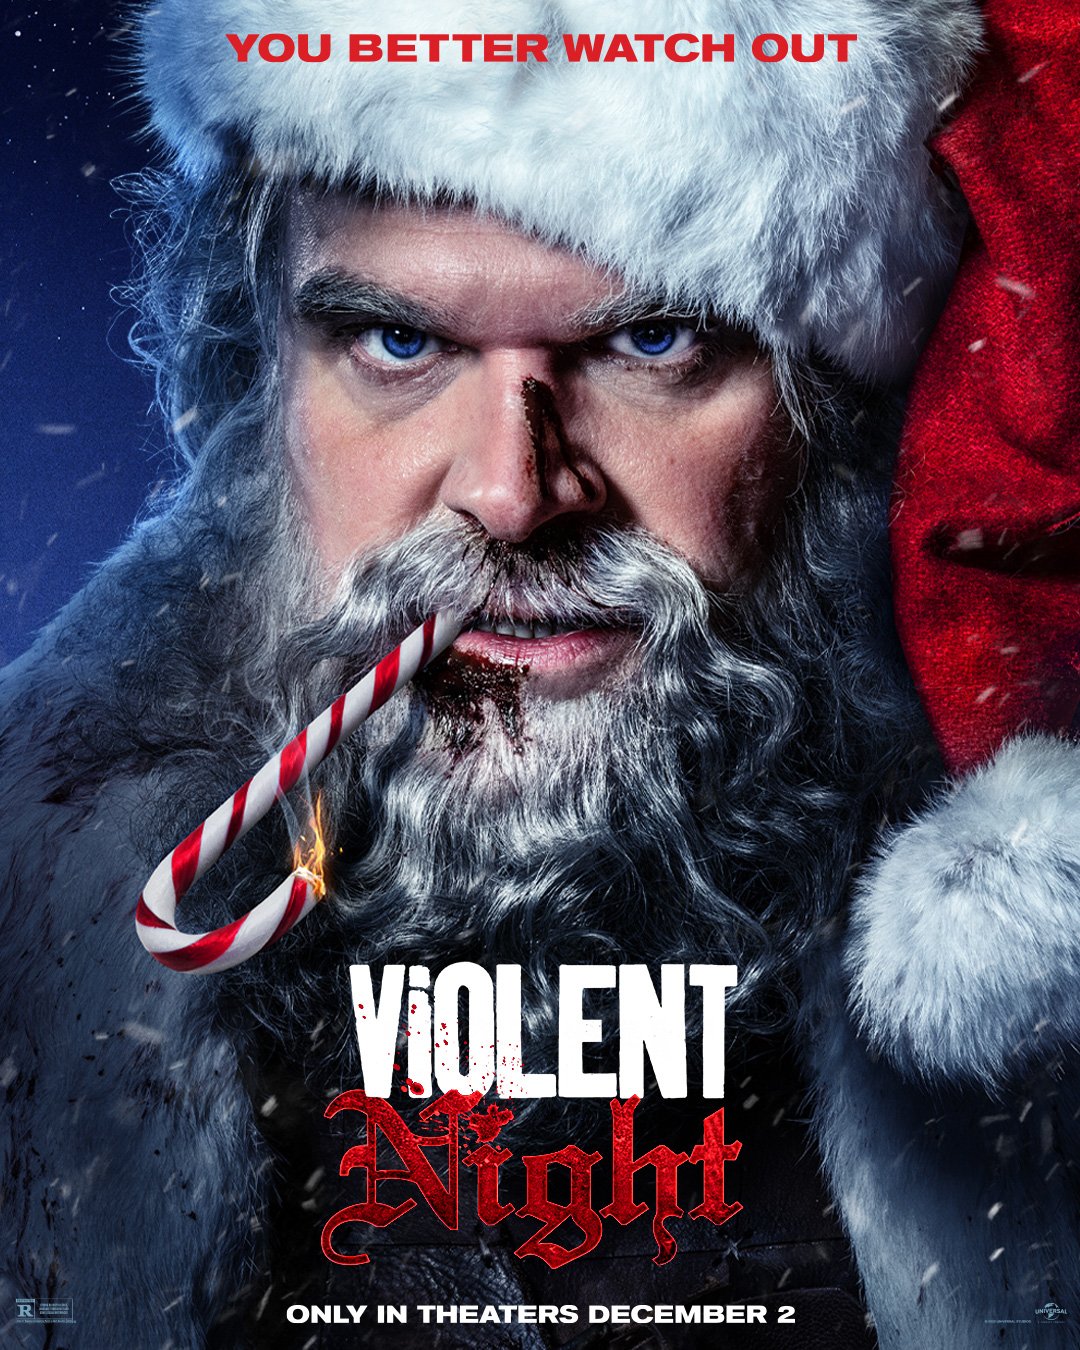 Violent Night images © Universal Pictures